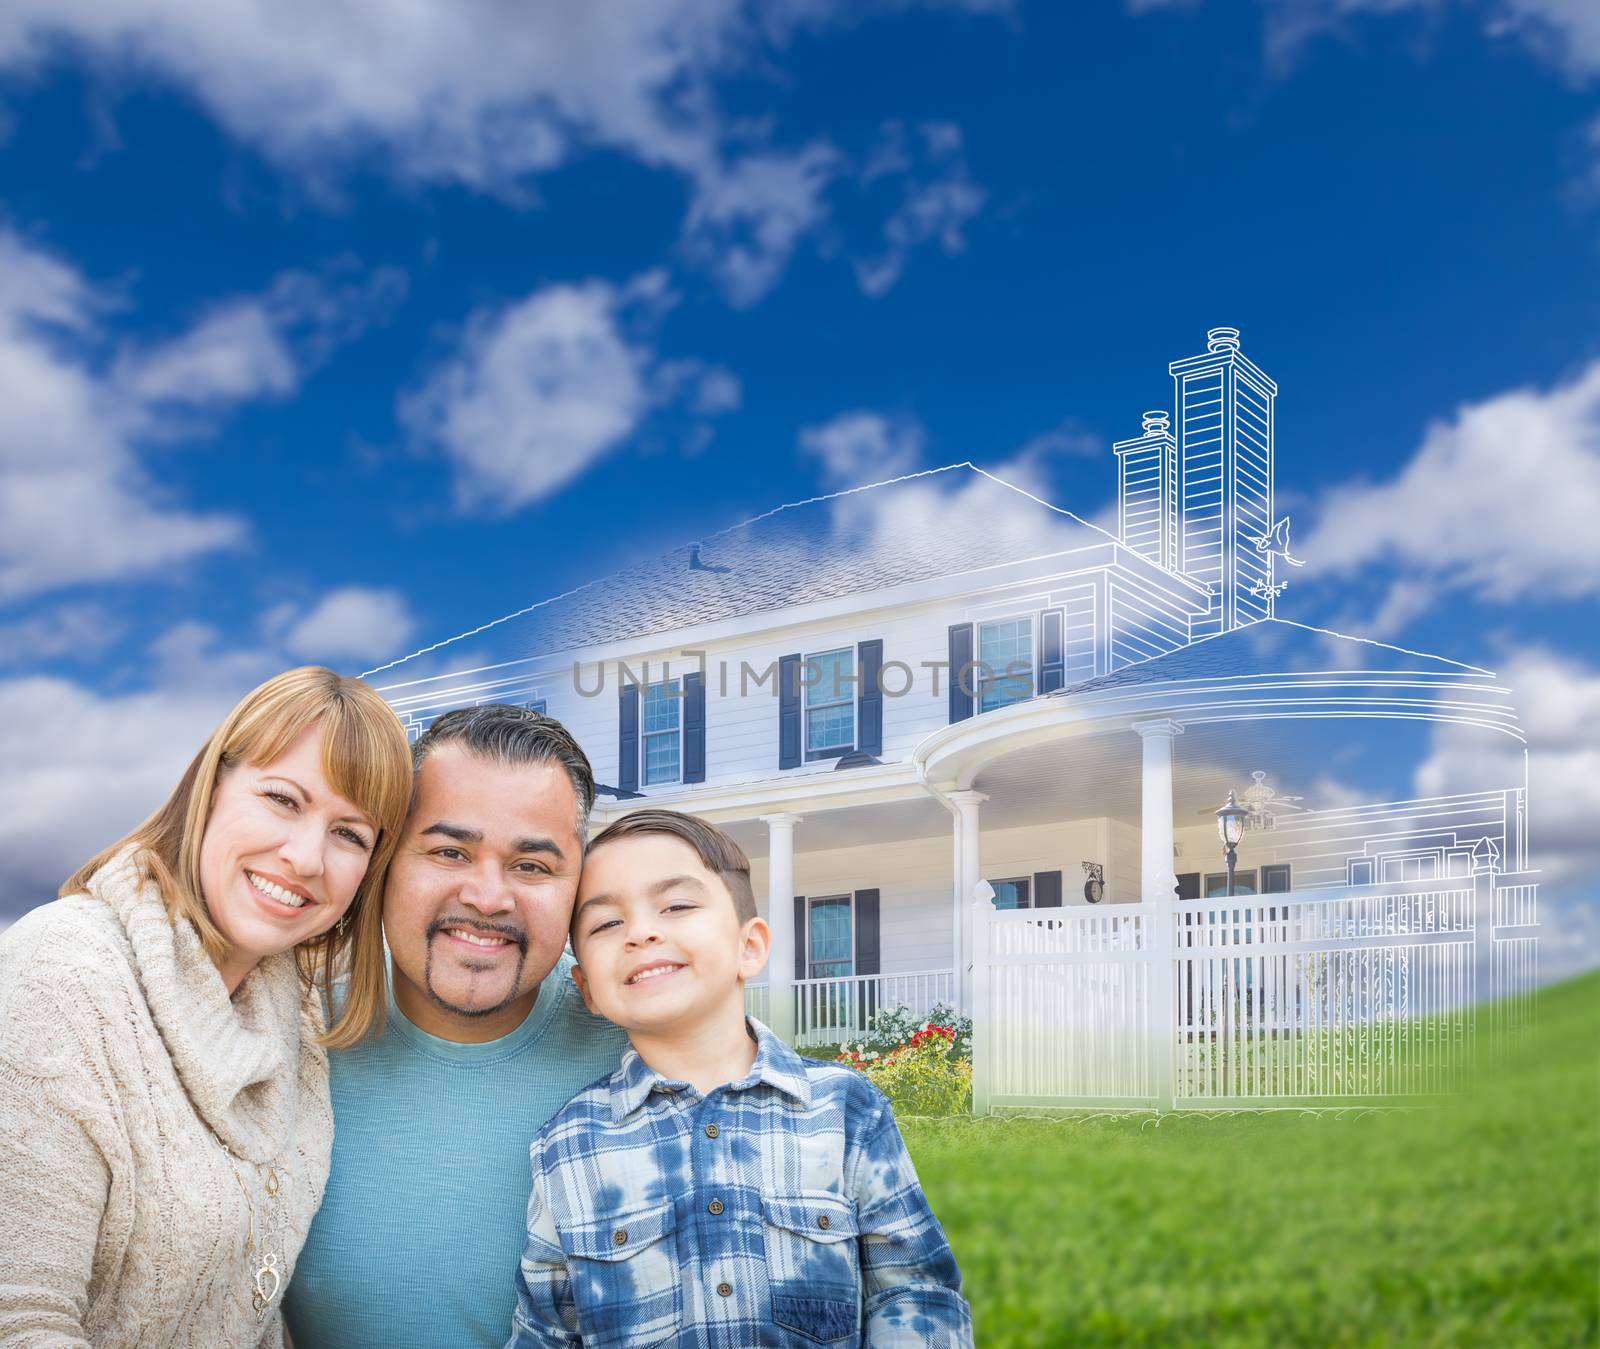 Mixed Race Hispanic and Caucasian Family In Front of Ghosted House Drawing on Grass.